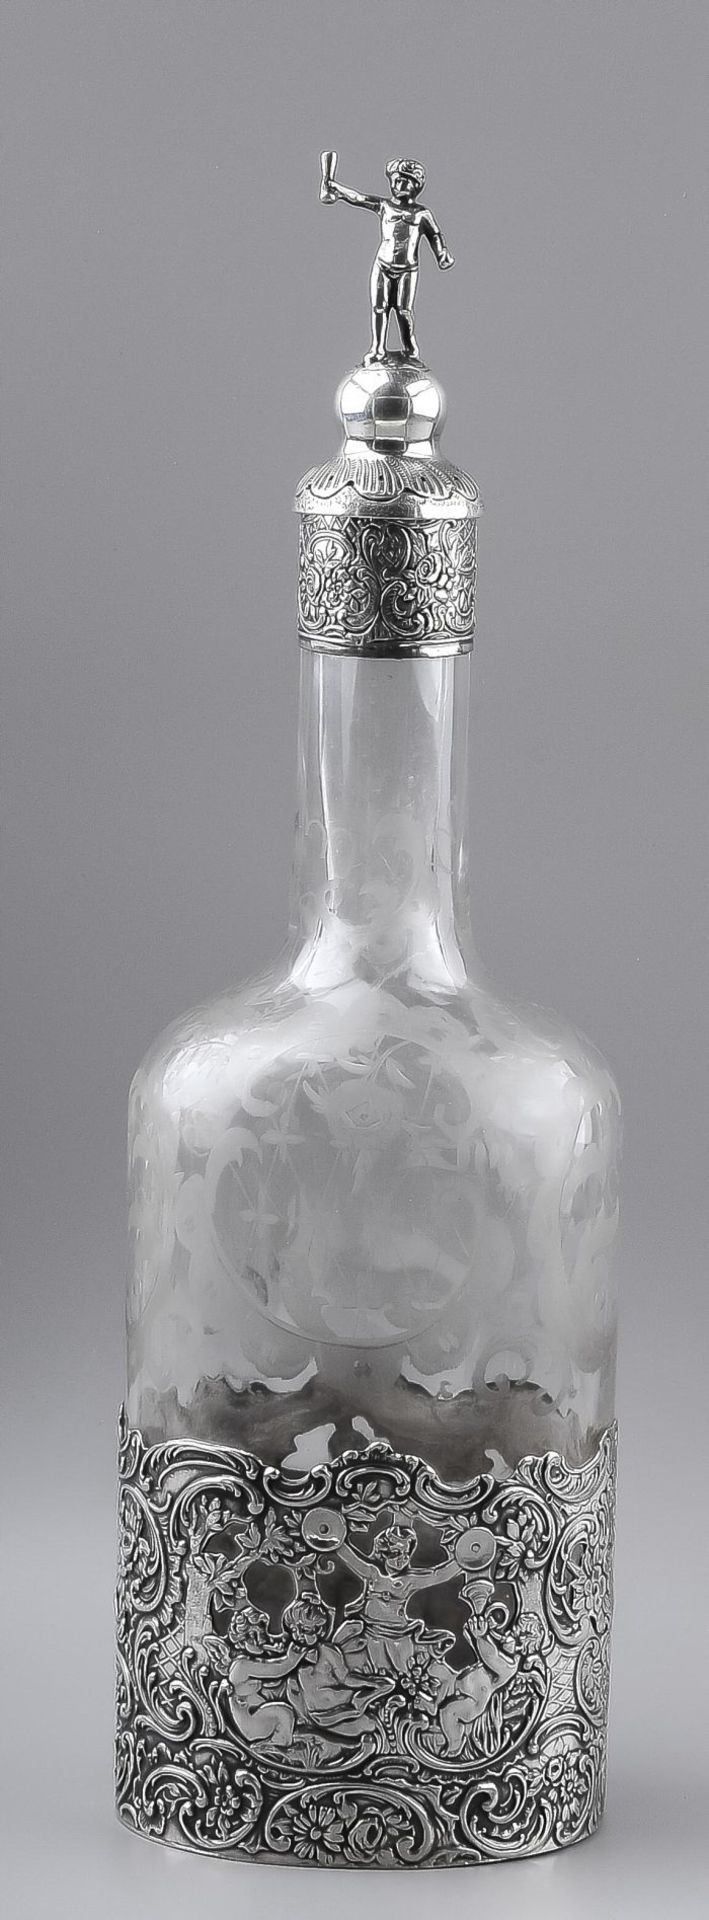 19th century decanter etched in silver frame with silver collar and cap, decorated with floral